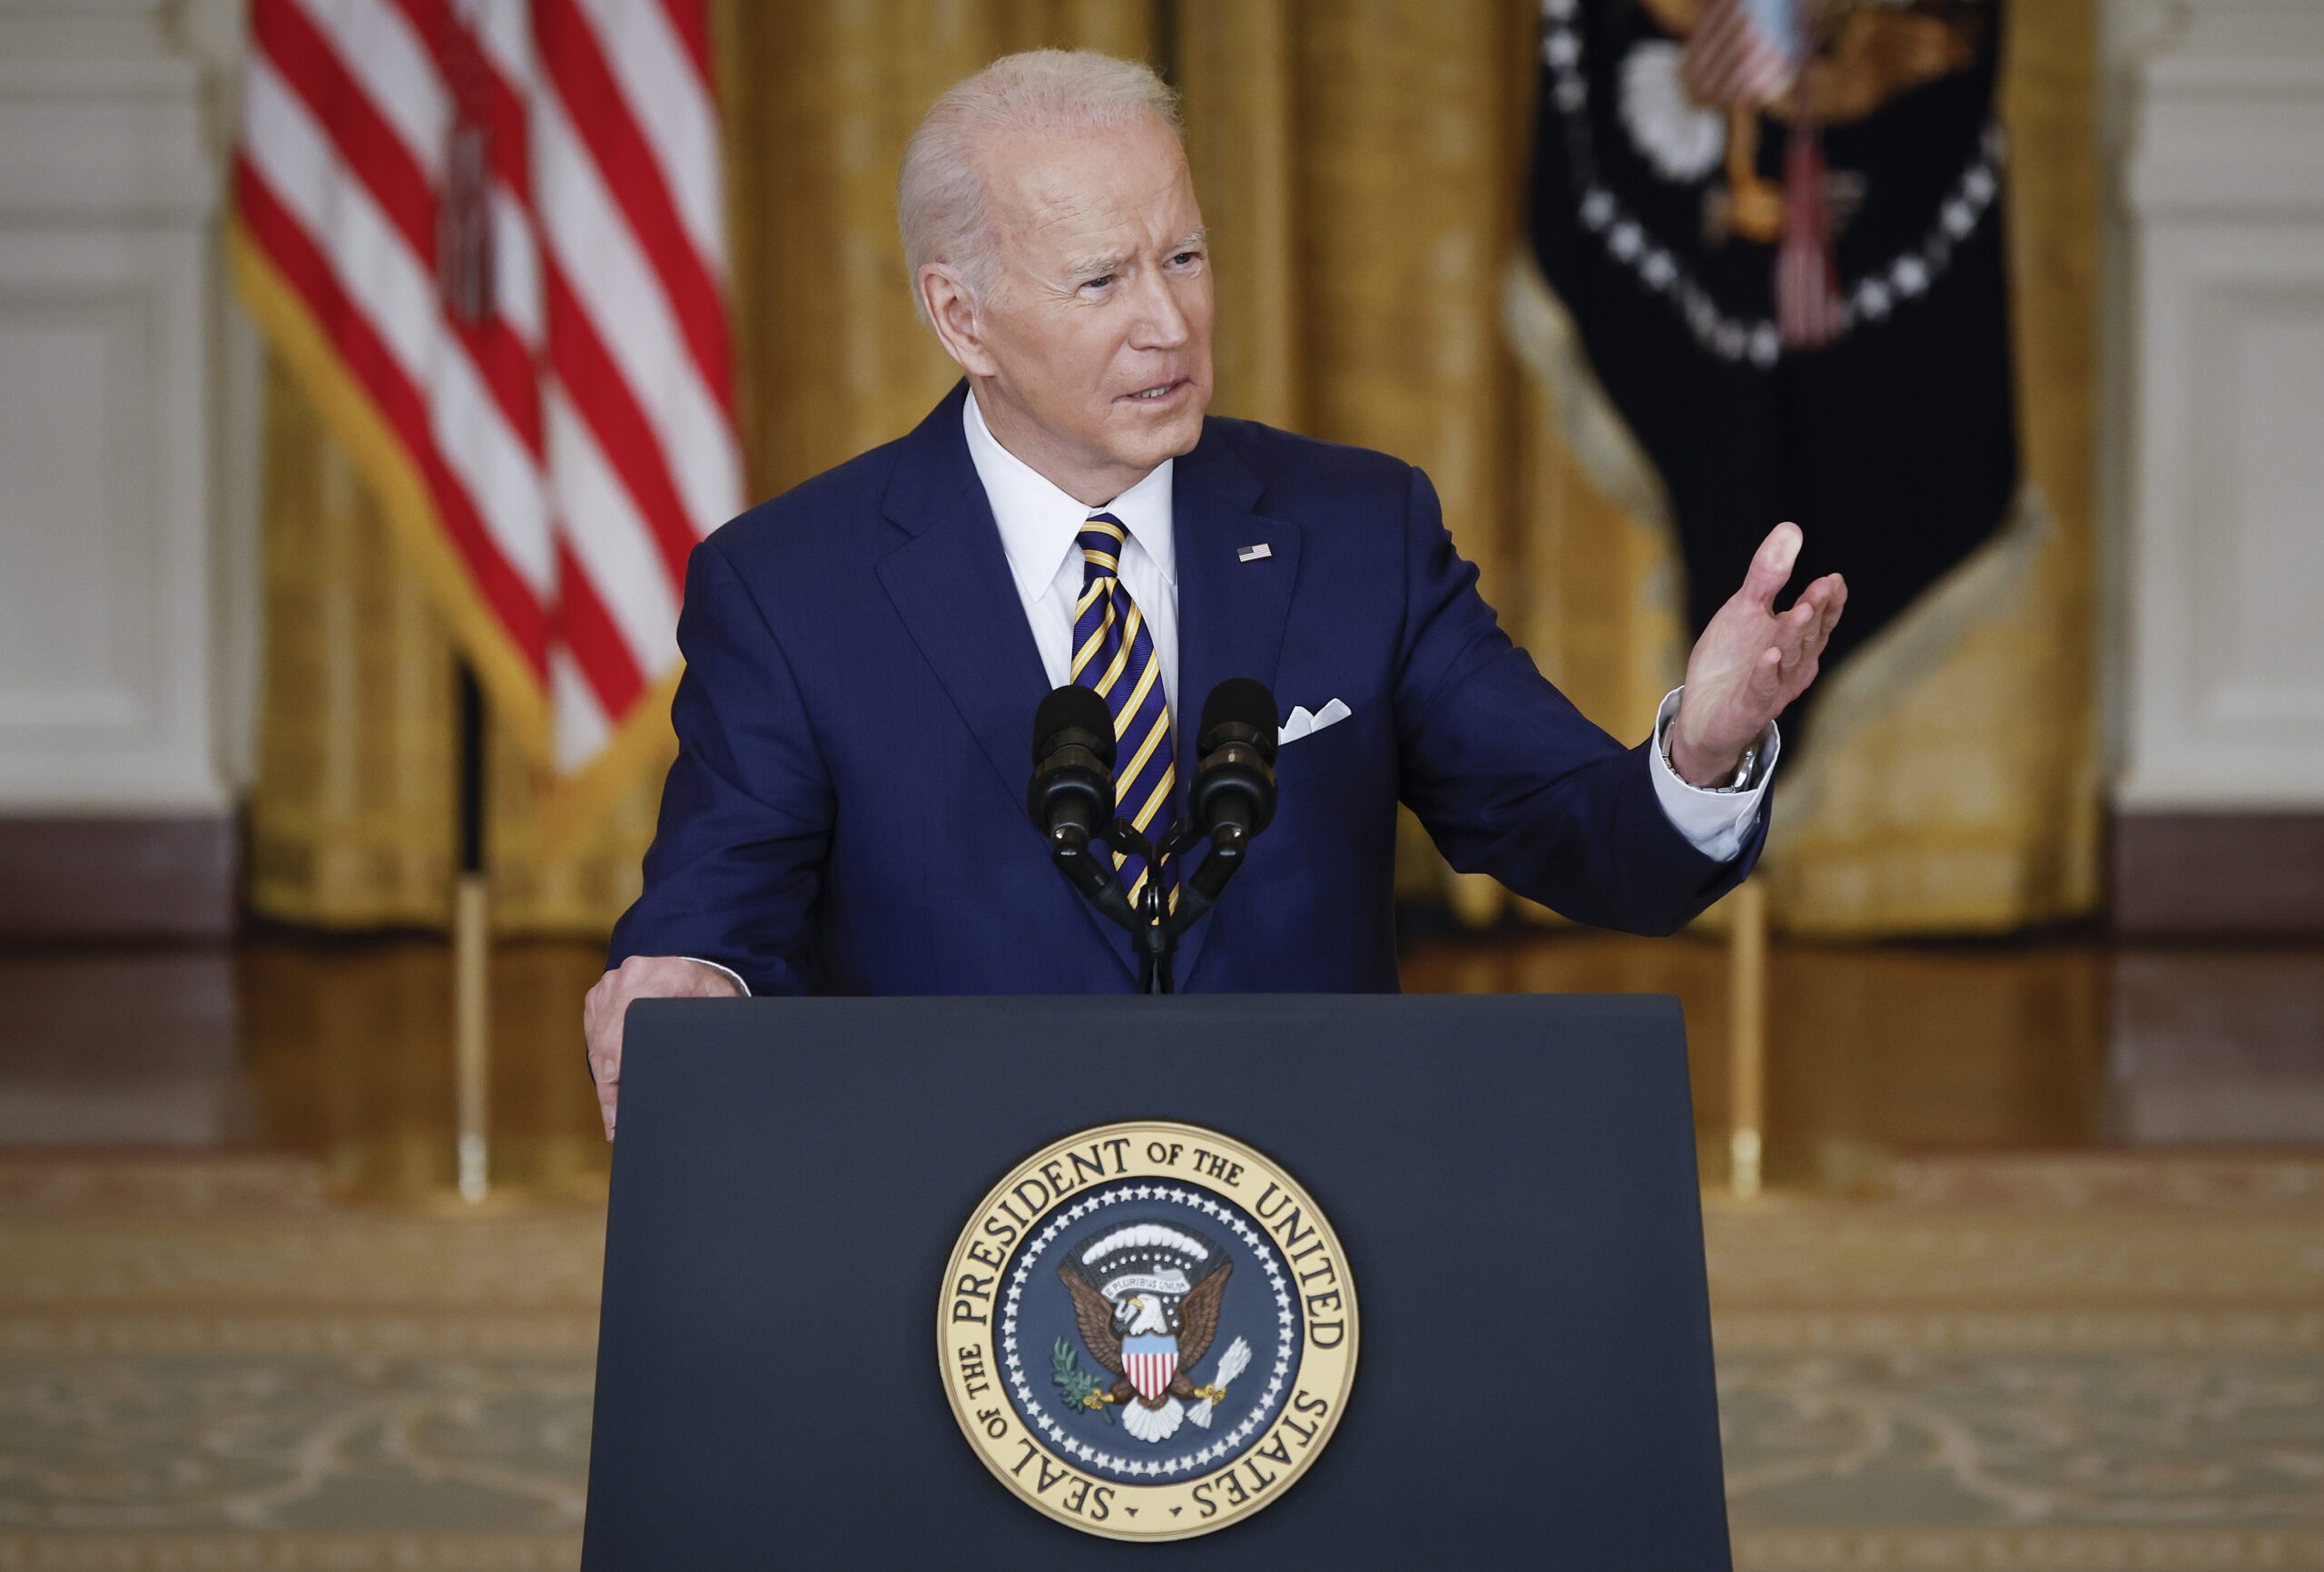 biden-refuses-to-back-down-on-build-back-better,-believes-most-of-the-country-supports-it